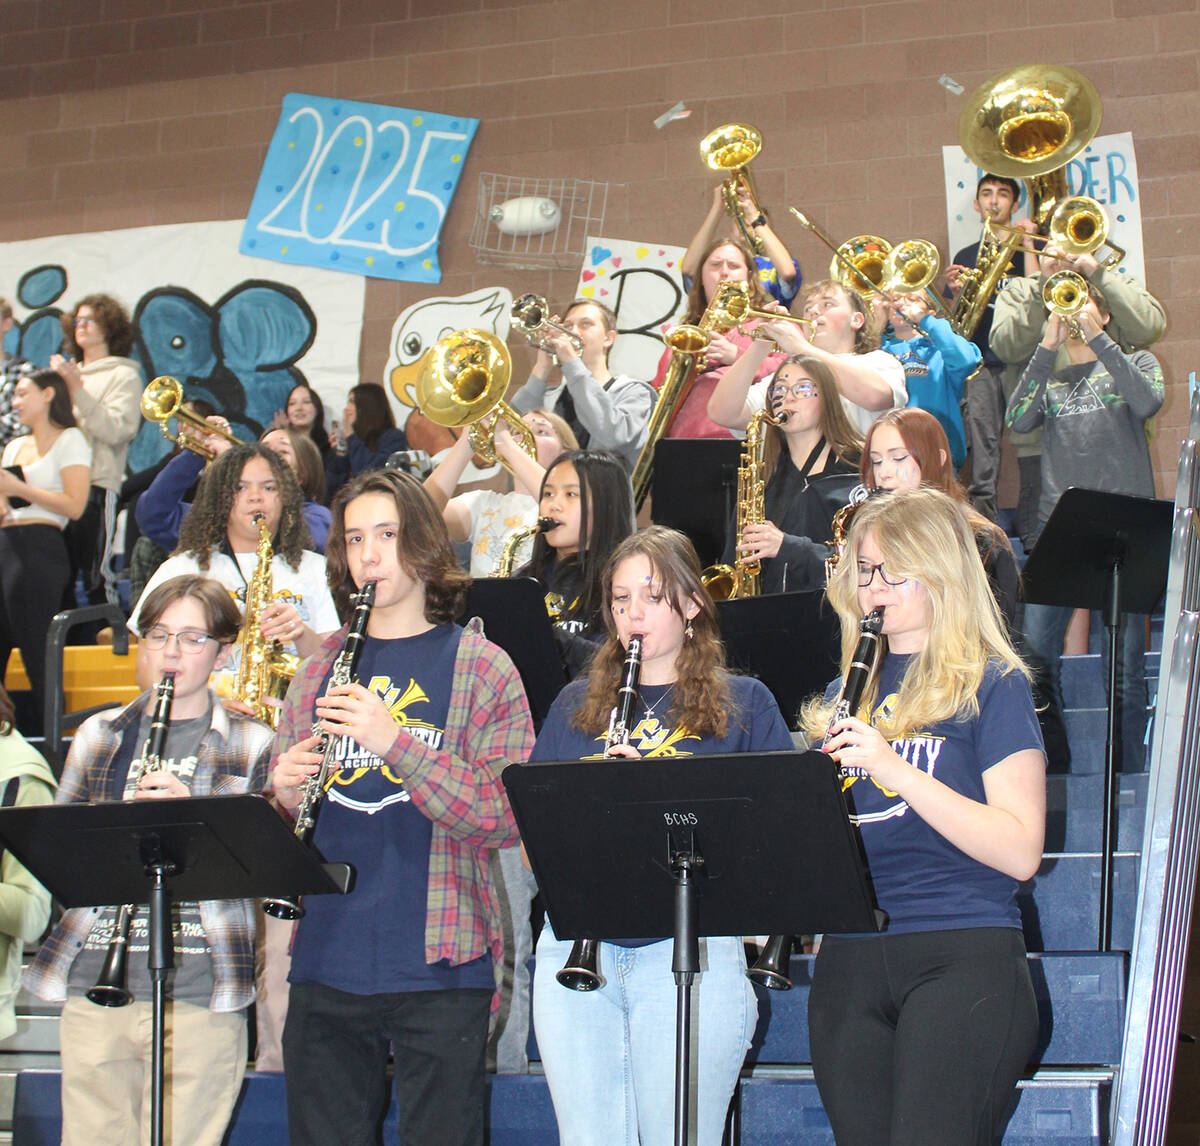 The BCHS band got the students fired up by playing the school’s fight song.